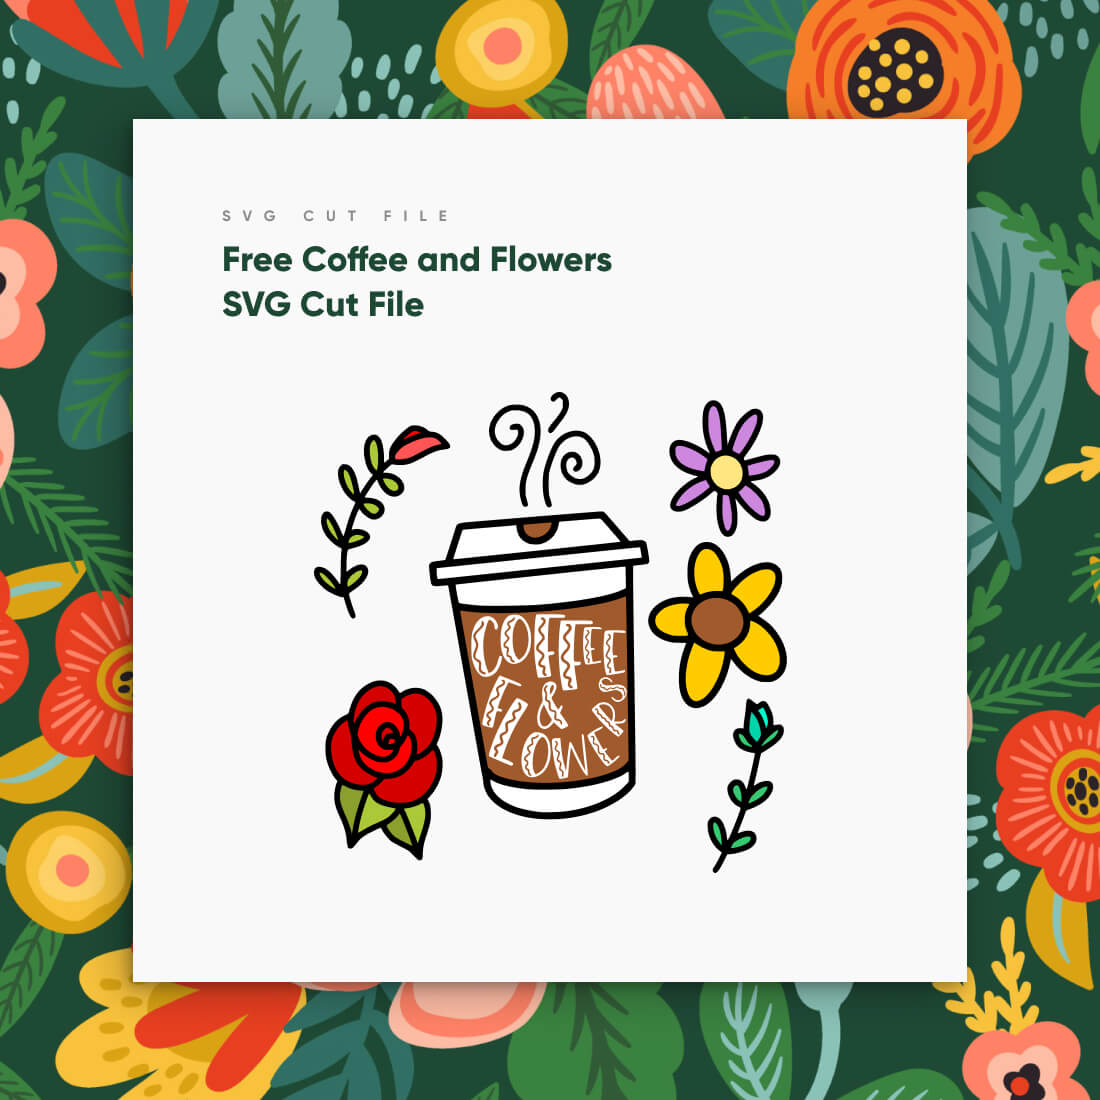 Free Coffee and Flowers SVG Cut File cover image.